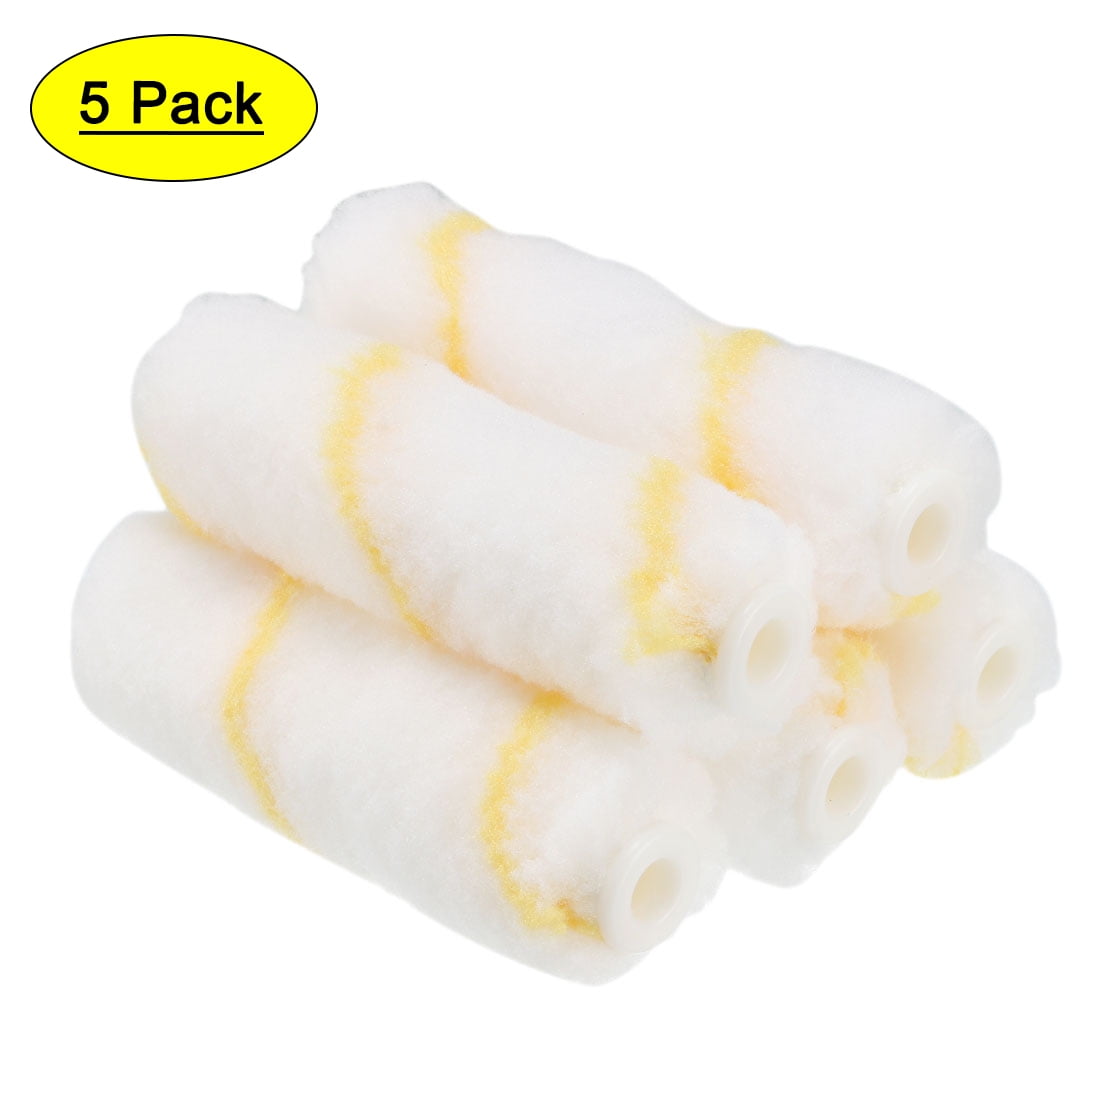 Uxcell 4 Inch 1/4 Hole Dia Mini Fabric Paint Roller Cover Nap Refill 5 Pack